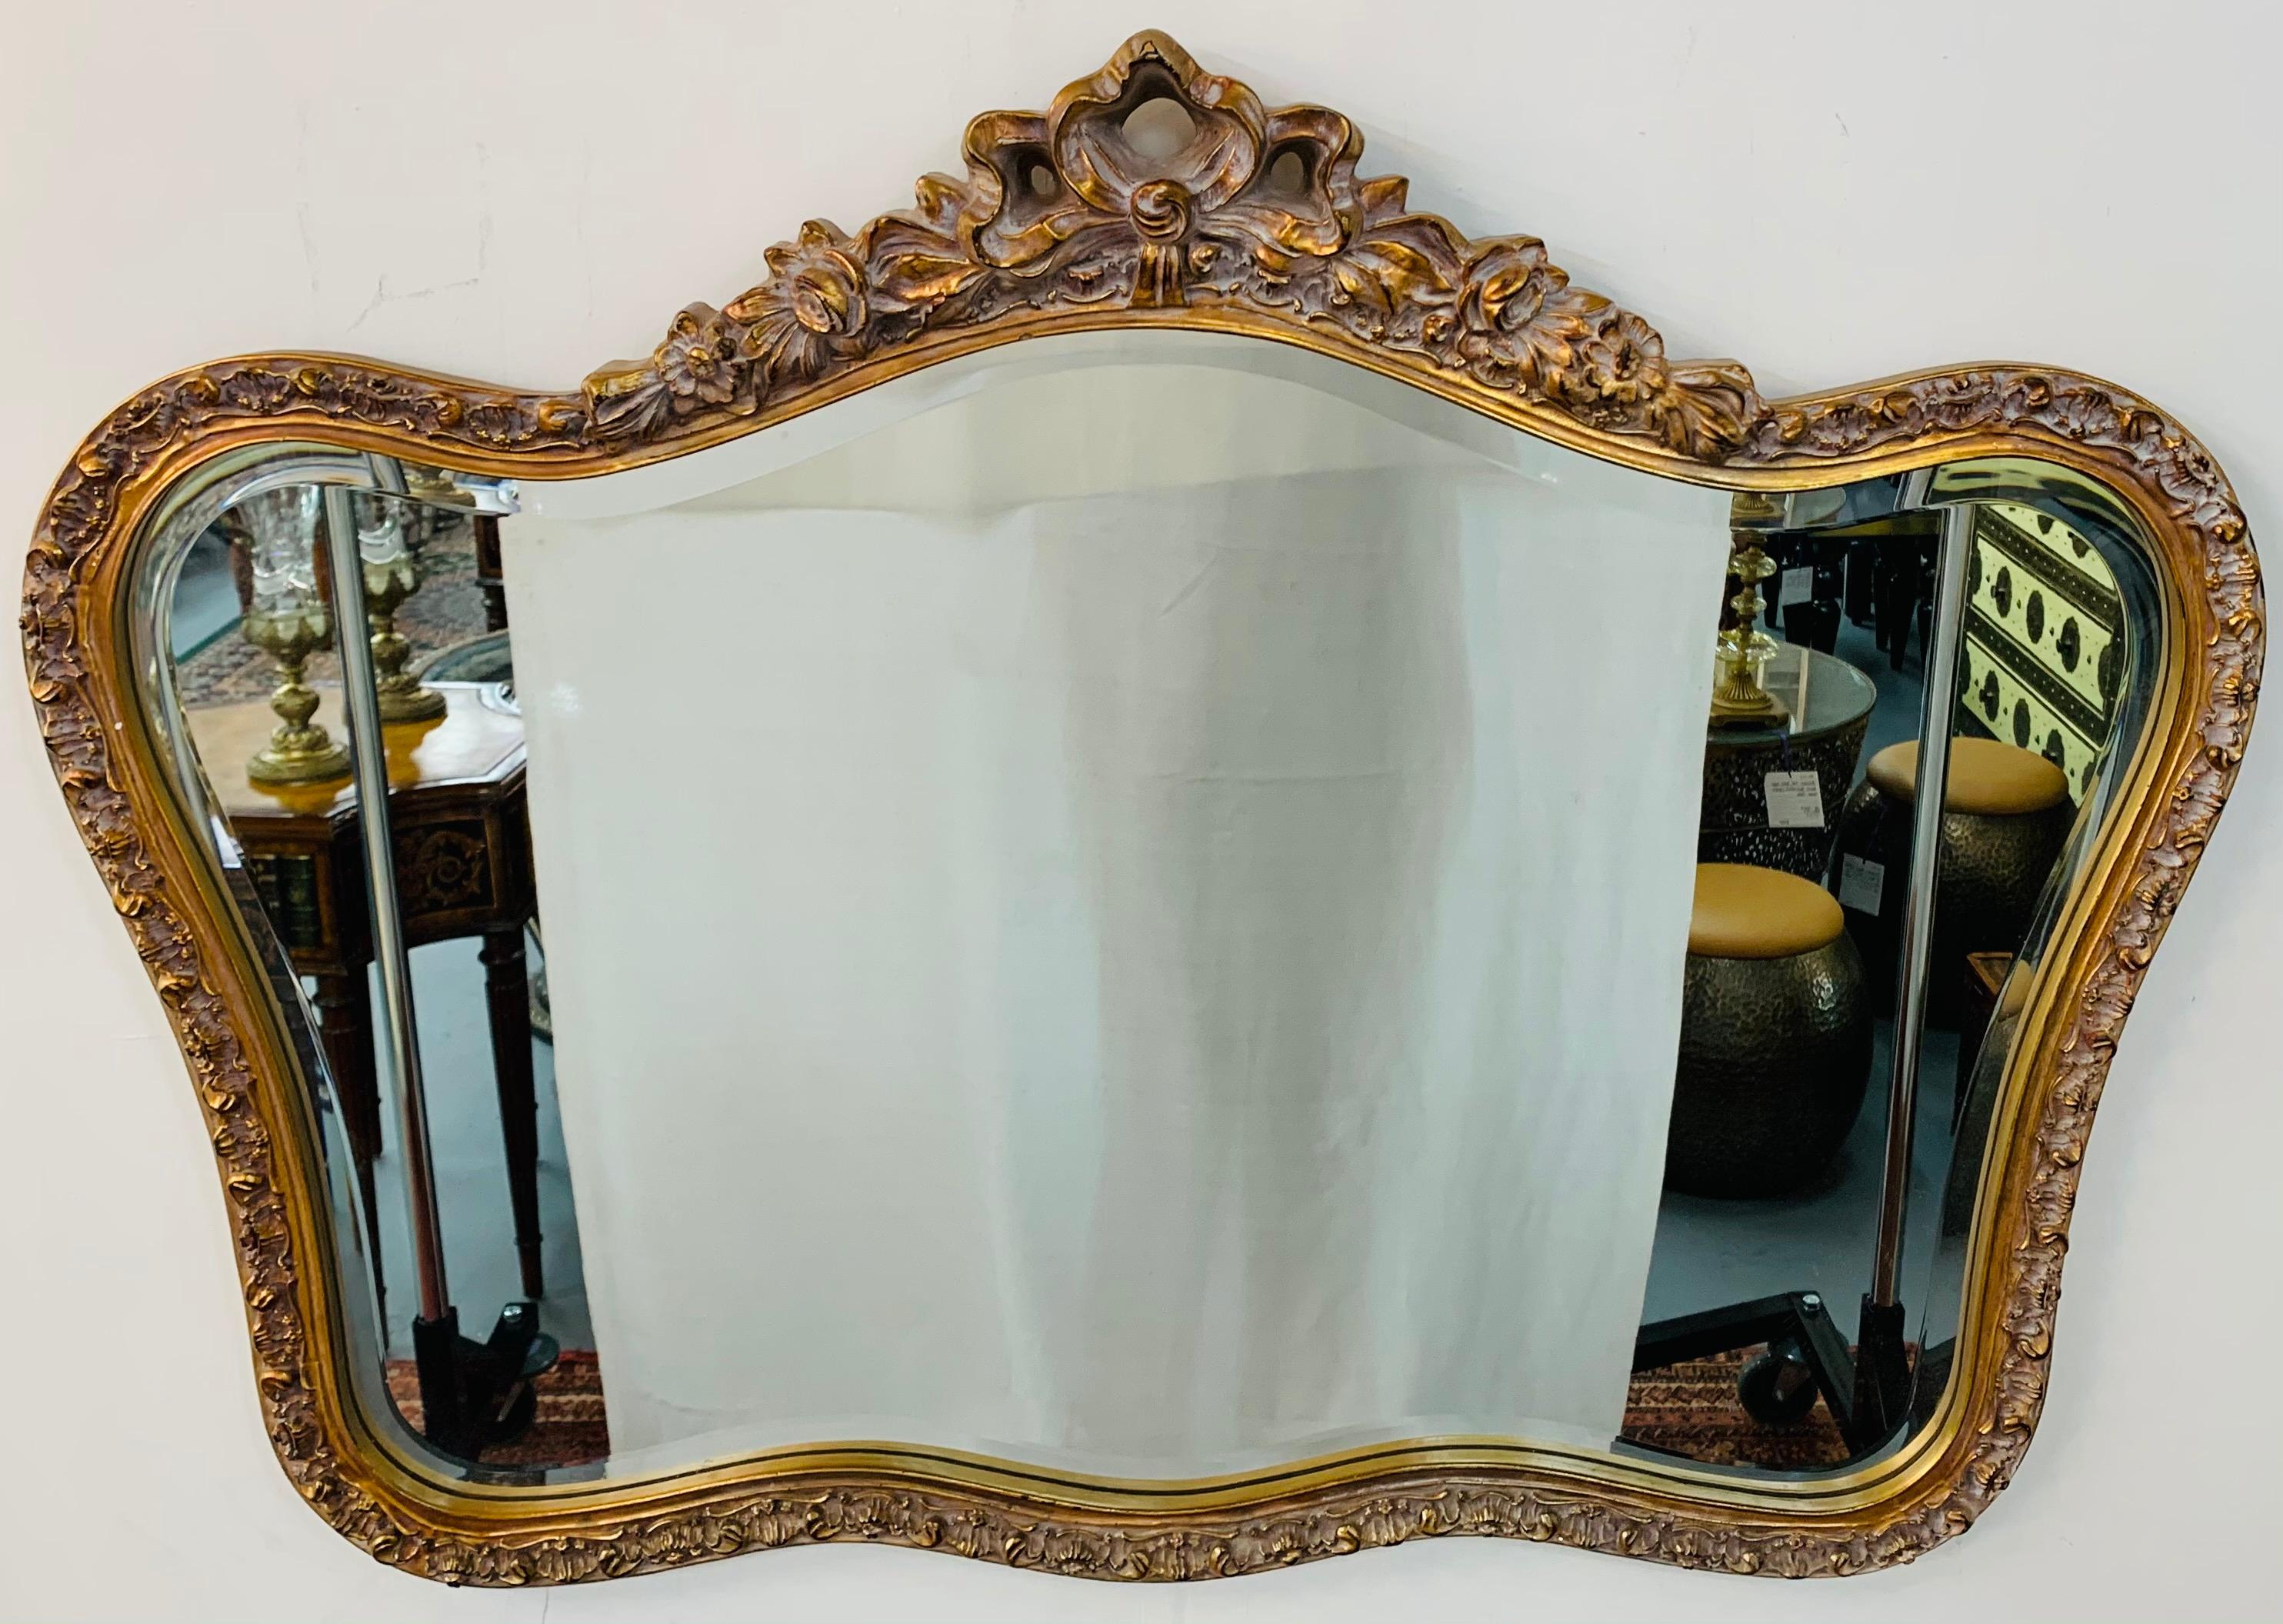 A beautiful French giltwood mirror. The mirror is finely carved with amazing details and features a charming bow / ribbon with flowers and a beveled edge glass mirror. This mirror displays horizontally and can be placed in multiple areas such as